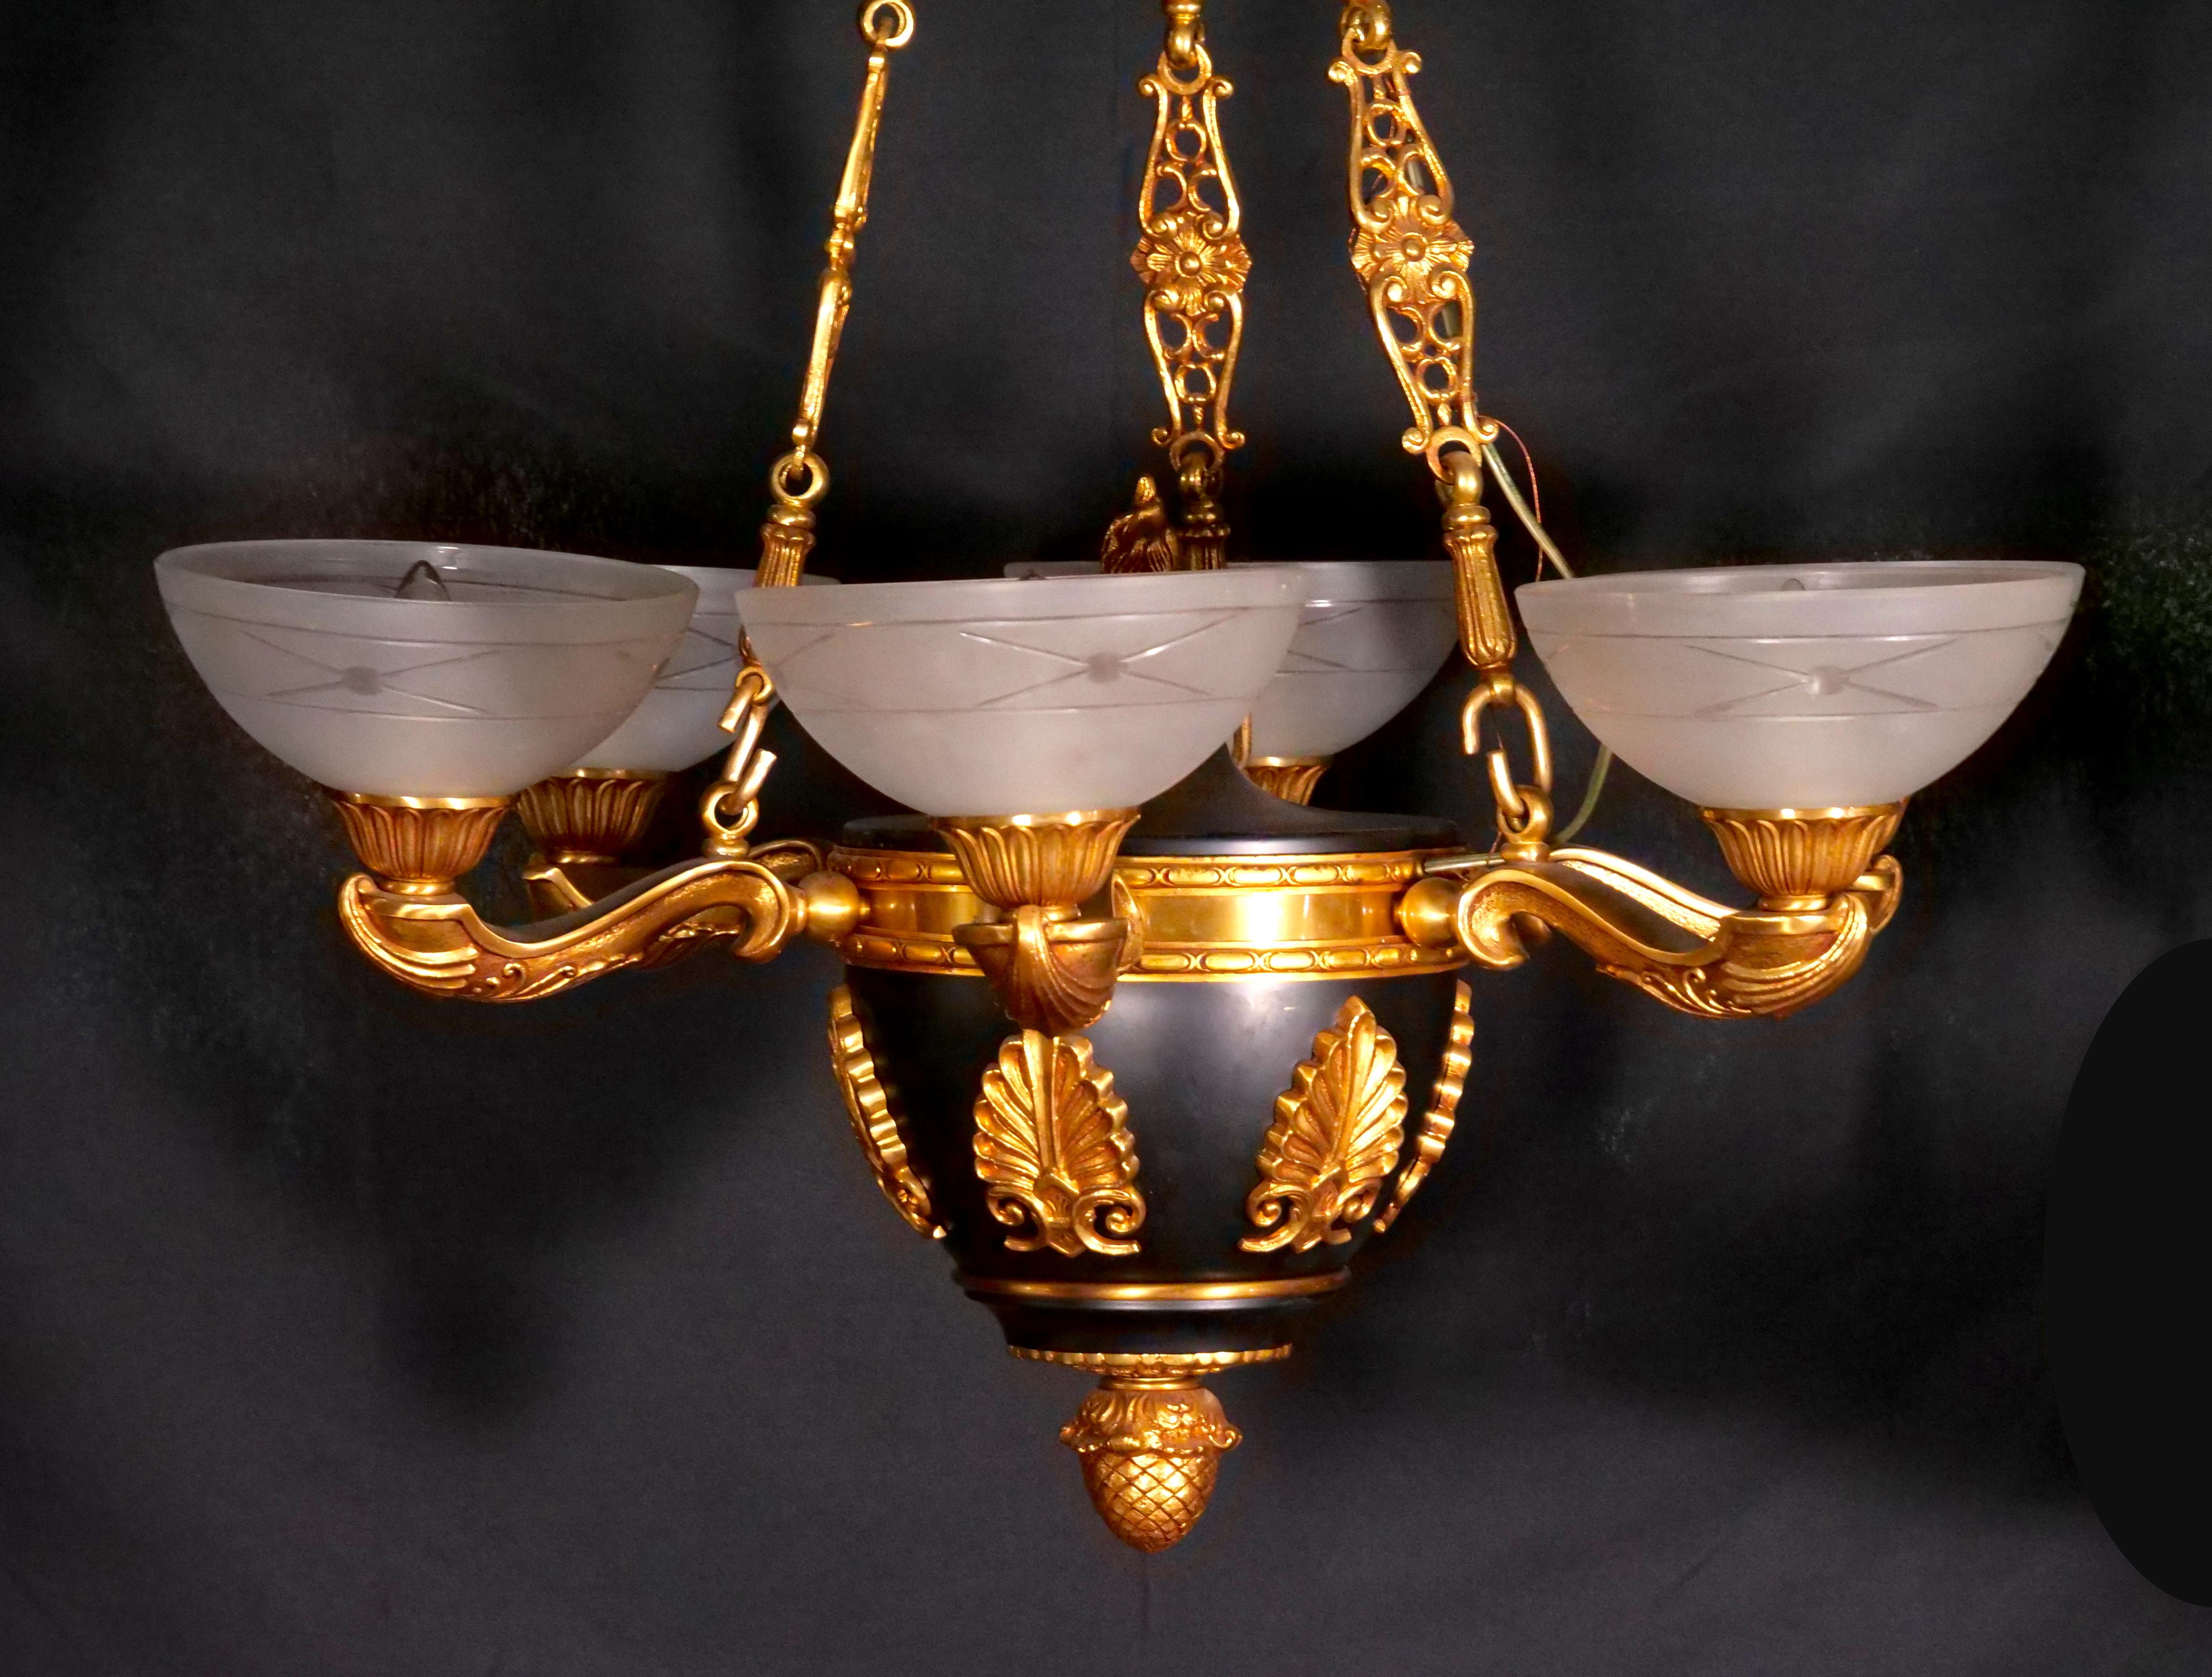 Illuminate your space with timeless elegance using this exquisite 19th Century French Empire Style Bronze Chandelier, designed in the form of a Greek oil lamp. This chandelier is a remarkable fusion of art and functionality, meticulously crafted